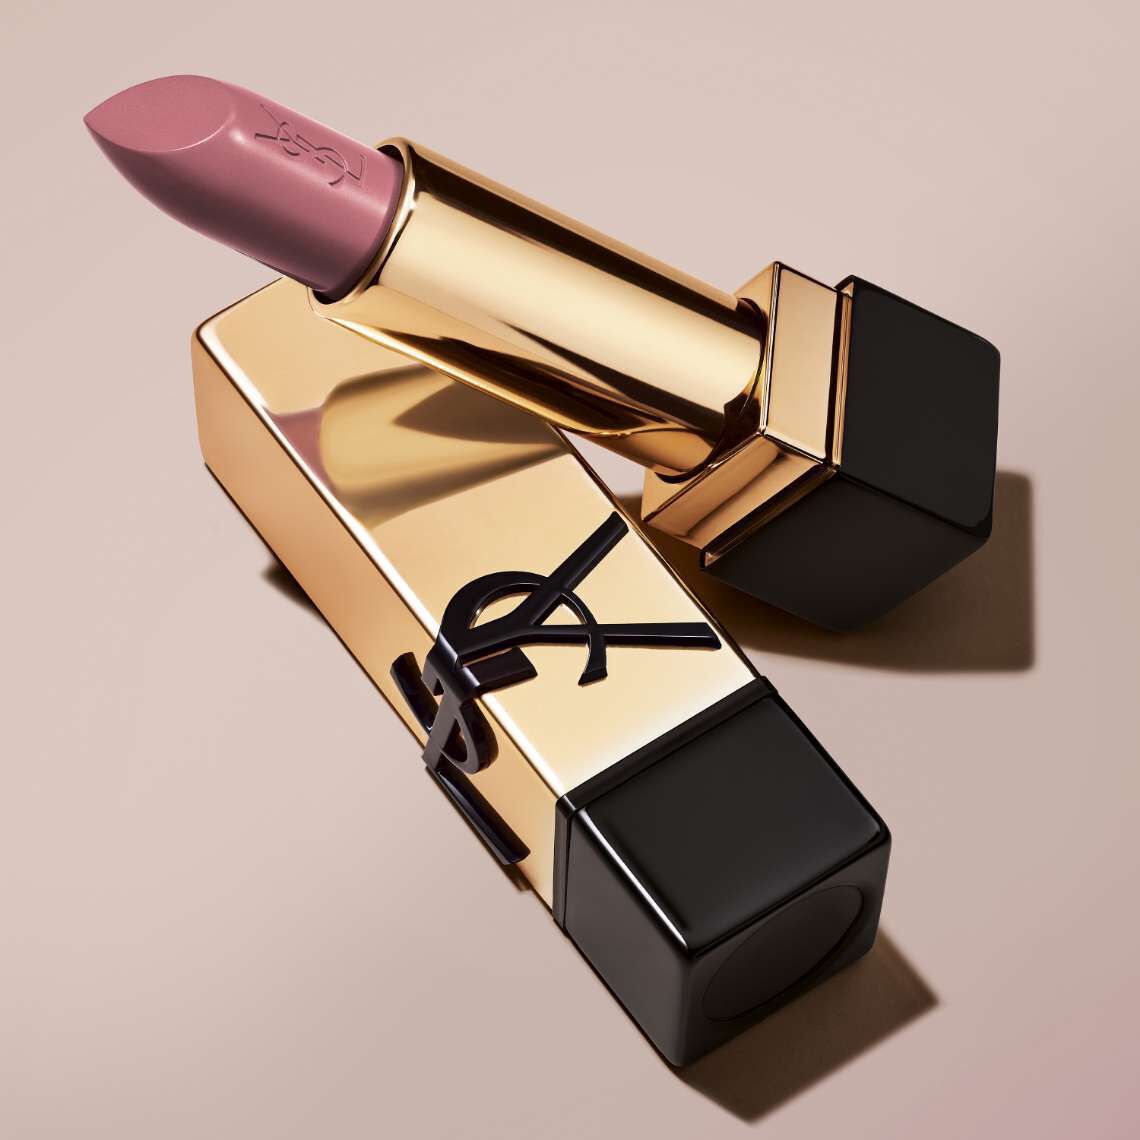 DISCOVER THE NEW ROUGE PUR COUTURE COLOR AND CARE LIPSTICK